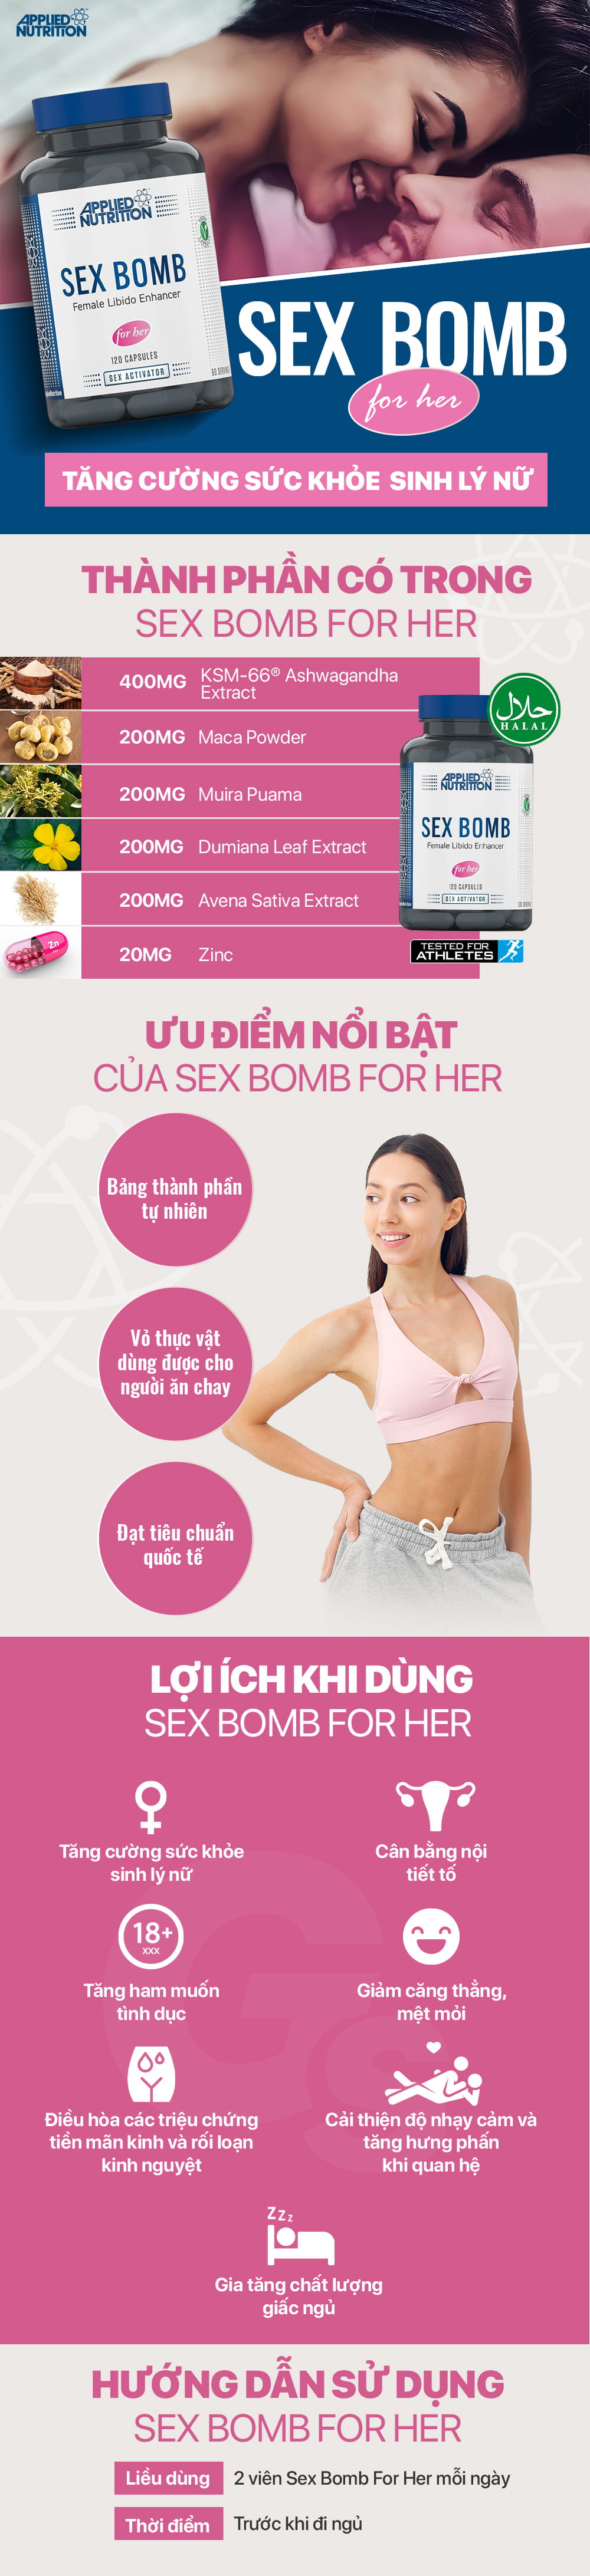 sex-bomb-for-her-gymstore